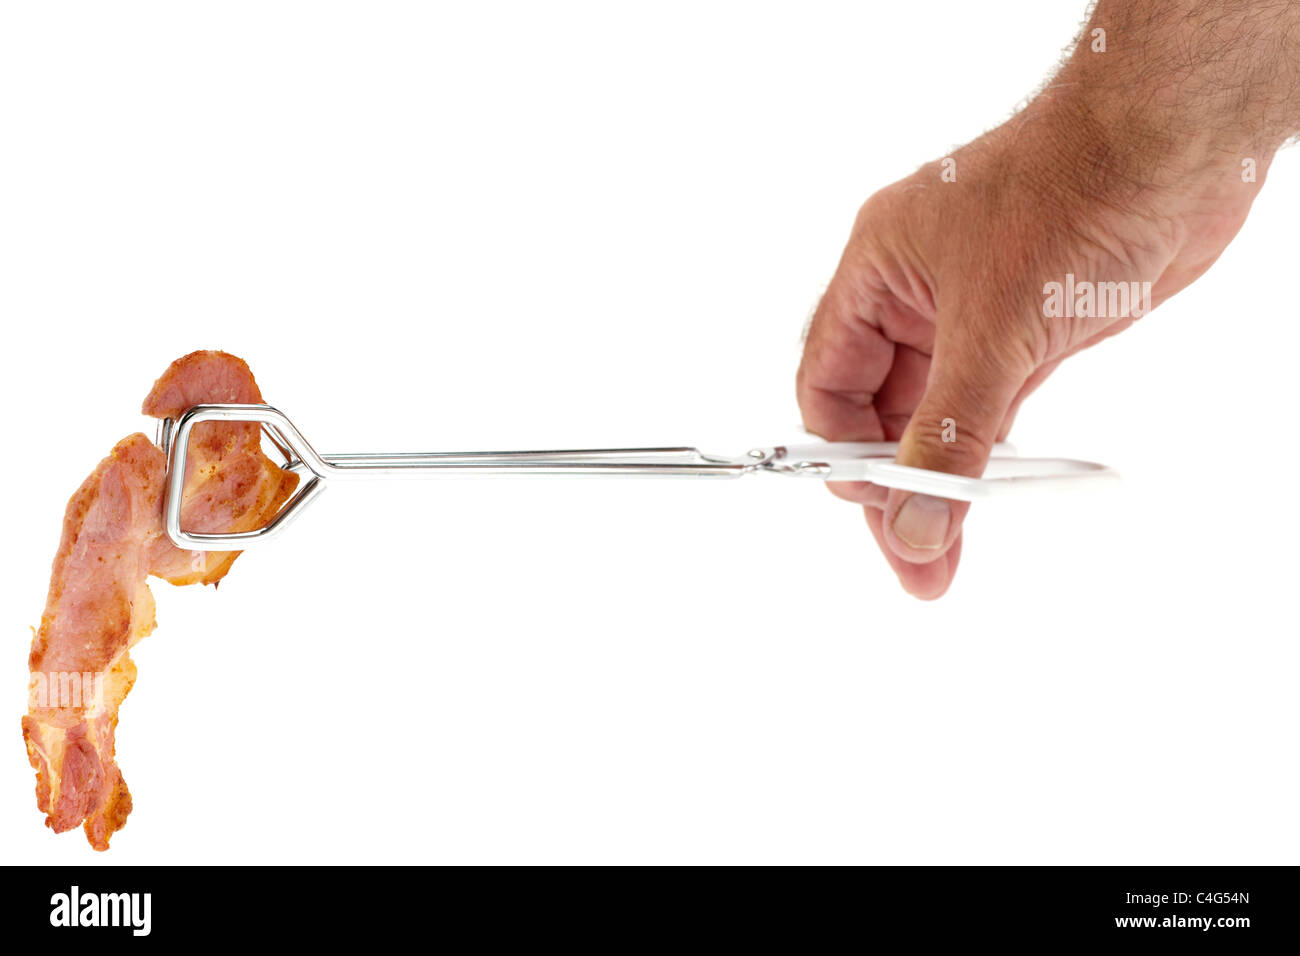 Single rasher of bacon picked up with a mans hand holding kitchen tongs Stock Photo